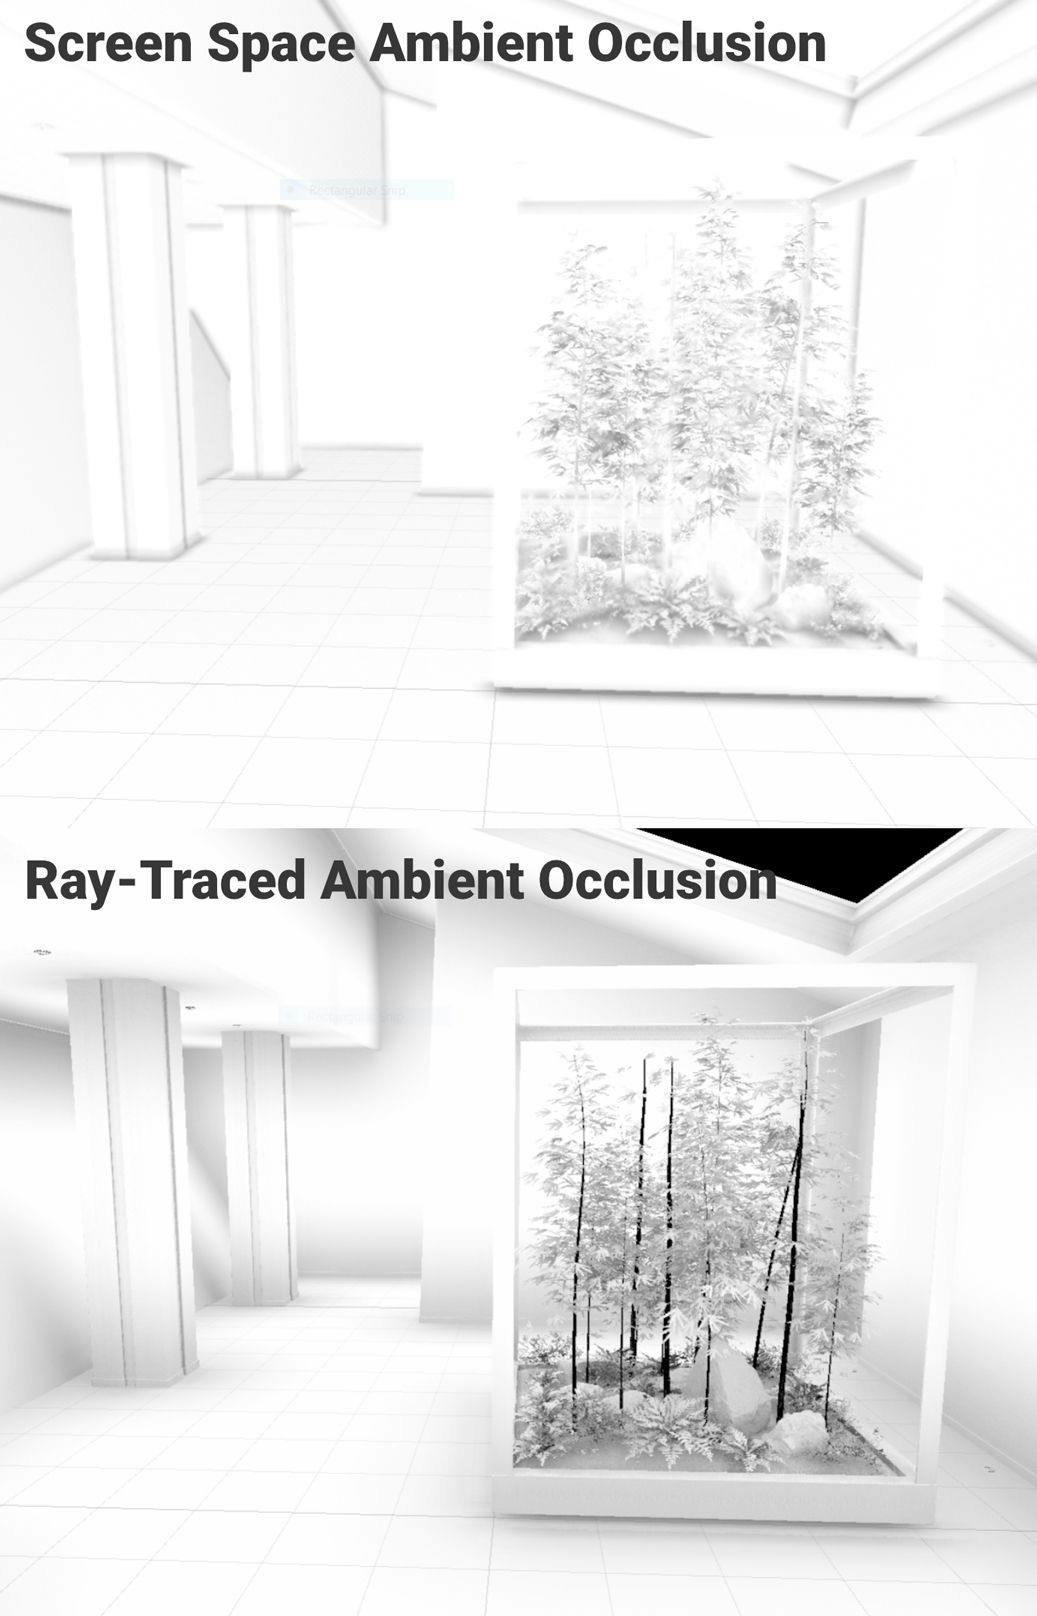 Screen Space Ambient Occlusion против Ray-Traced Ambient Occlusion